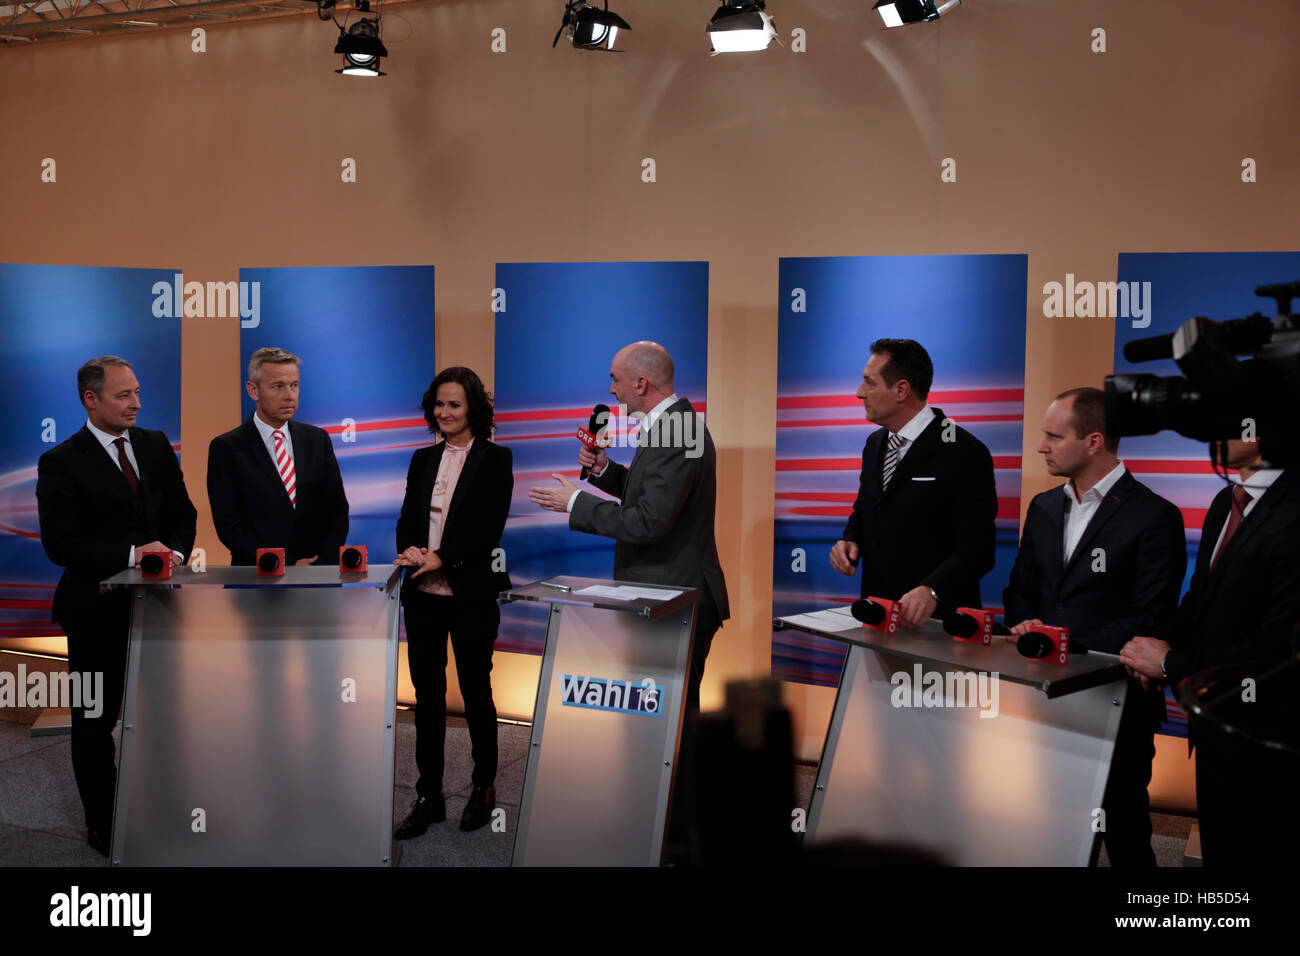 Eva Glawischnig-Piesczek, the federal spokeswoman of the Austrian Green party speaks on TV.HC Strache, the Chairman of the Freedom Party of Austria Chairman of the Freedom Party of AustriaReinhold Lopatka, the chairman of the parliamentary party of the Austrian People's Party (ÖVP), talks on TV.Politicians of all parties discuss the Presidential election results on TV. Preliminary results see independent candidate Alexander Van der Bellen as the winner of the Austrian Presidential elections. He and loosing candidate Norbert Hofer, as well as politicians from all parliamentary parties appeared Stock Photo